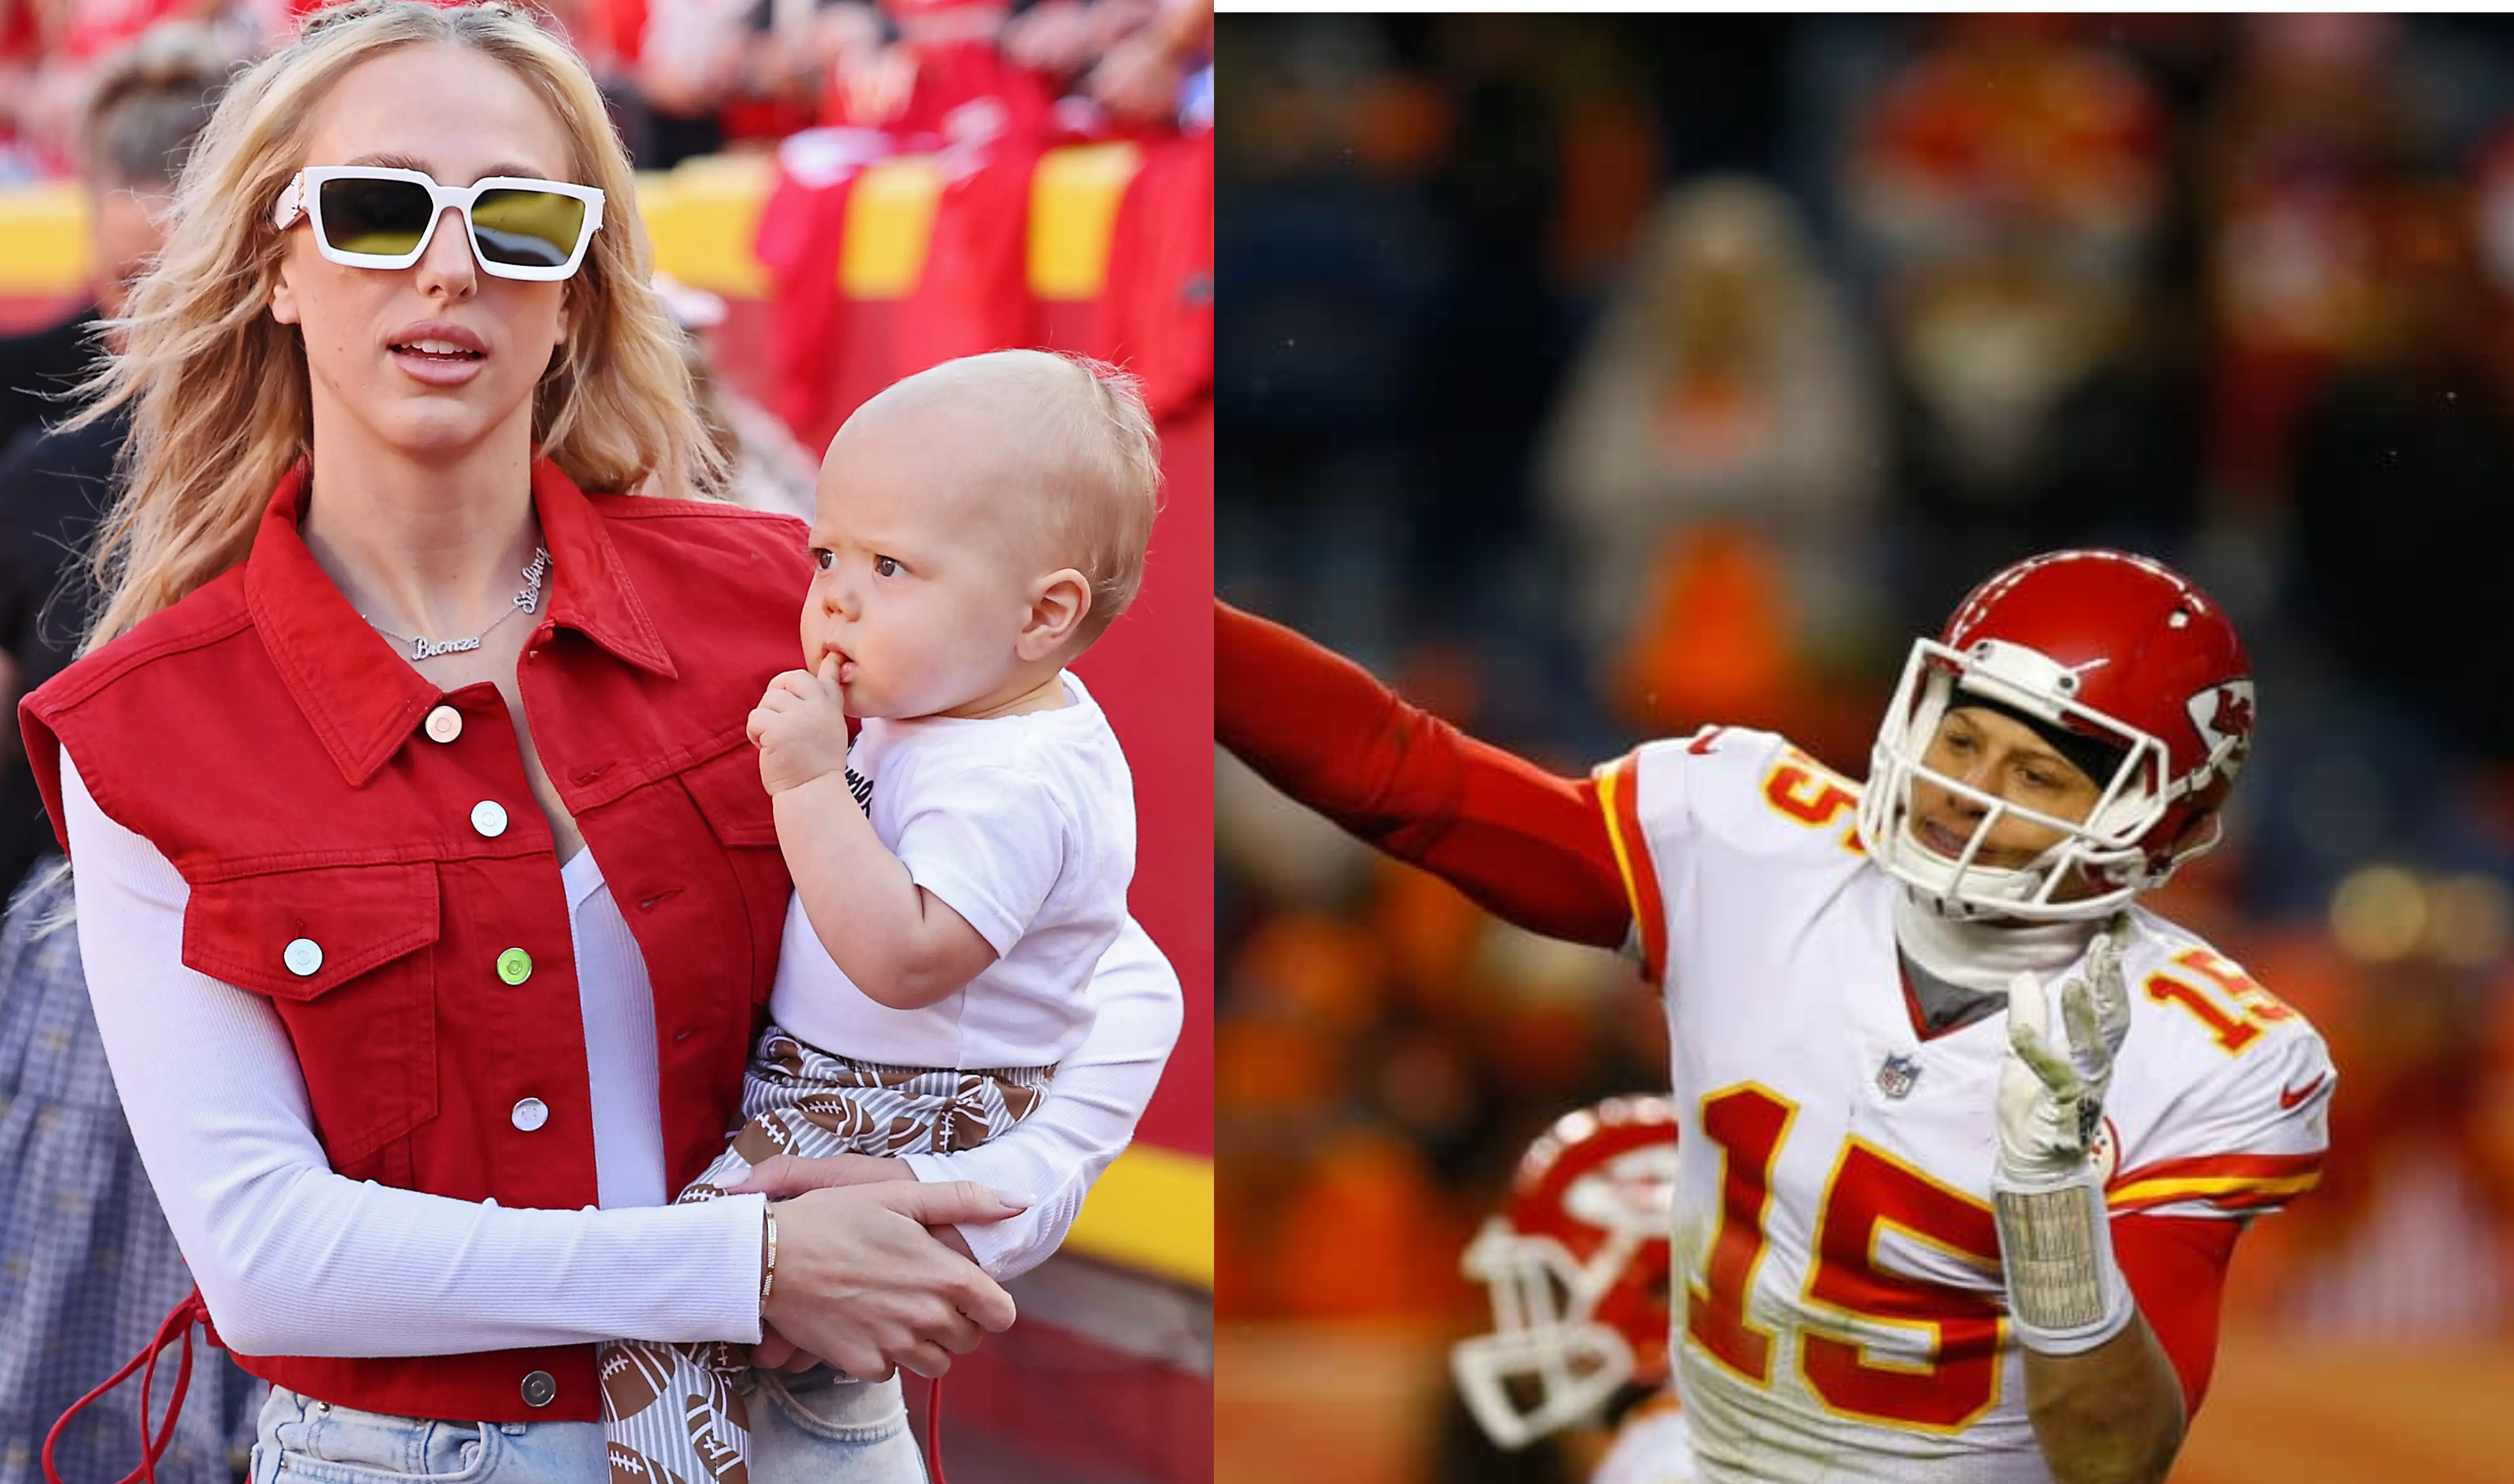 "I never knew I got married to a beast!" Brittany Mahomes threatens divorce after her husband throws a heavy punch at the referee after Chiefs' loss